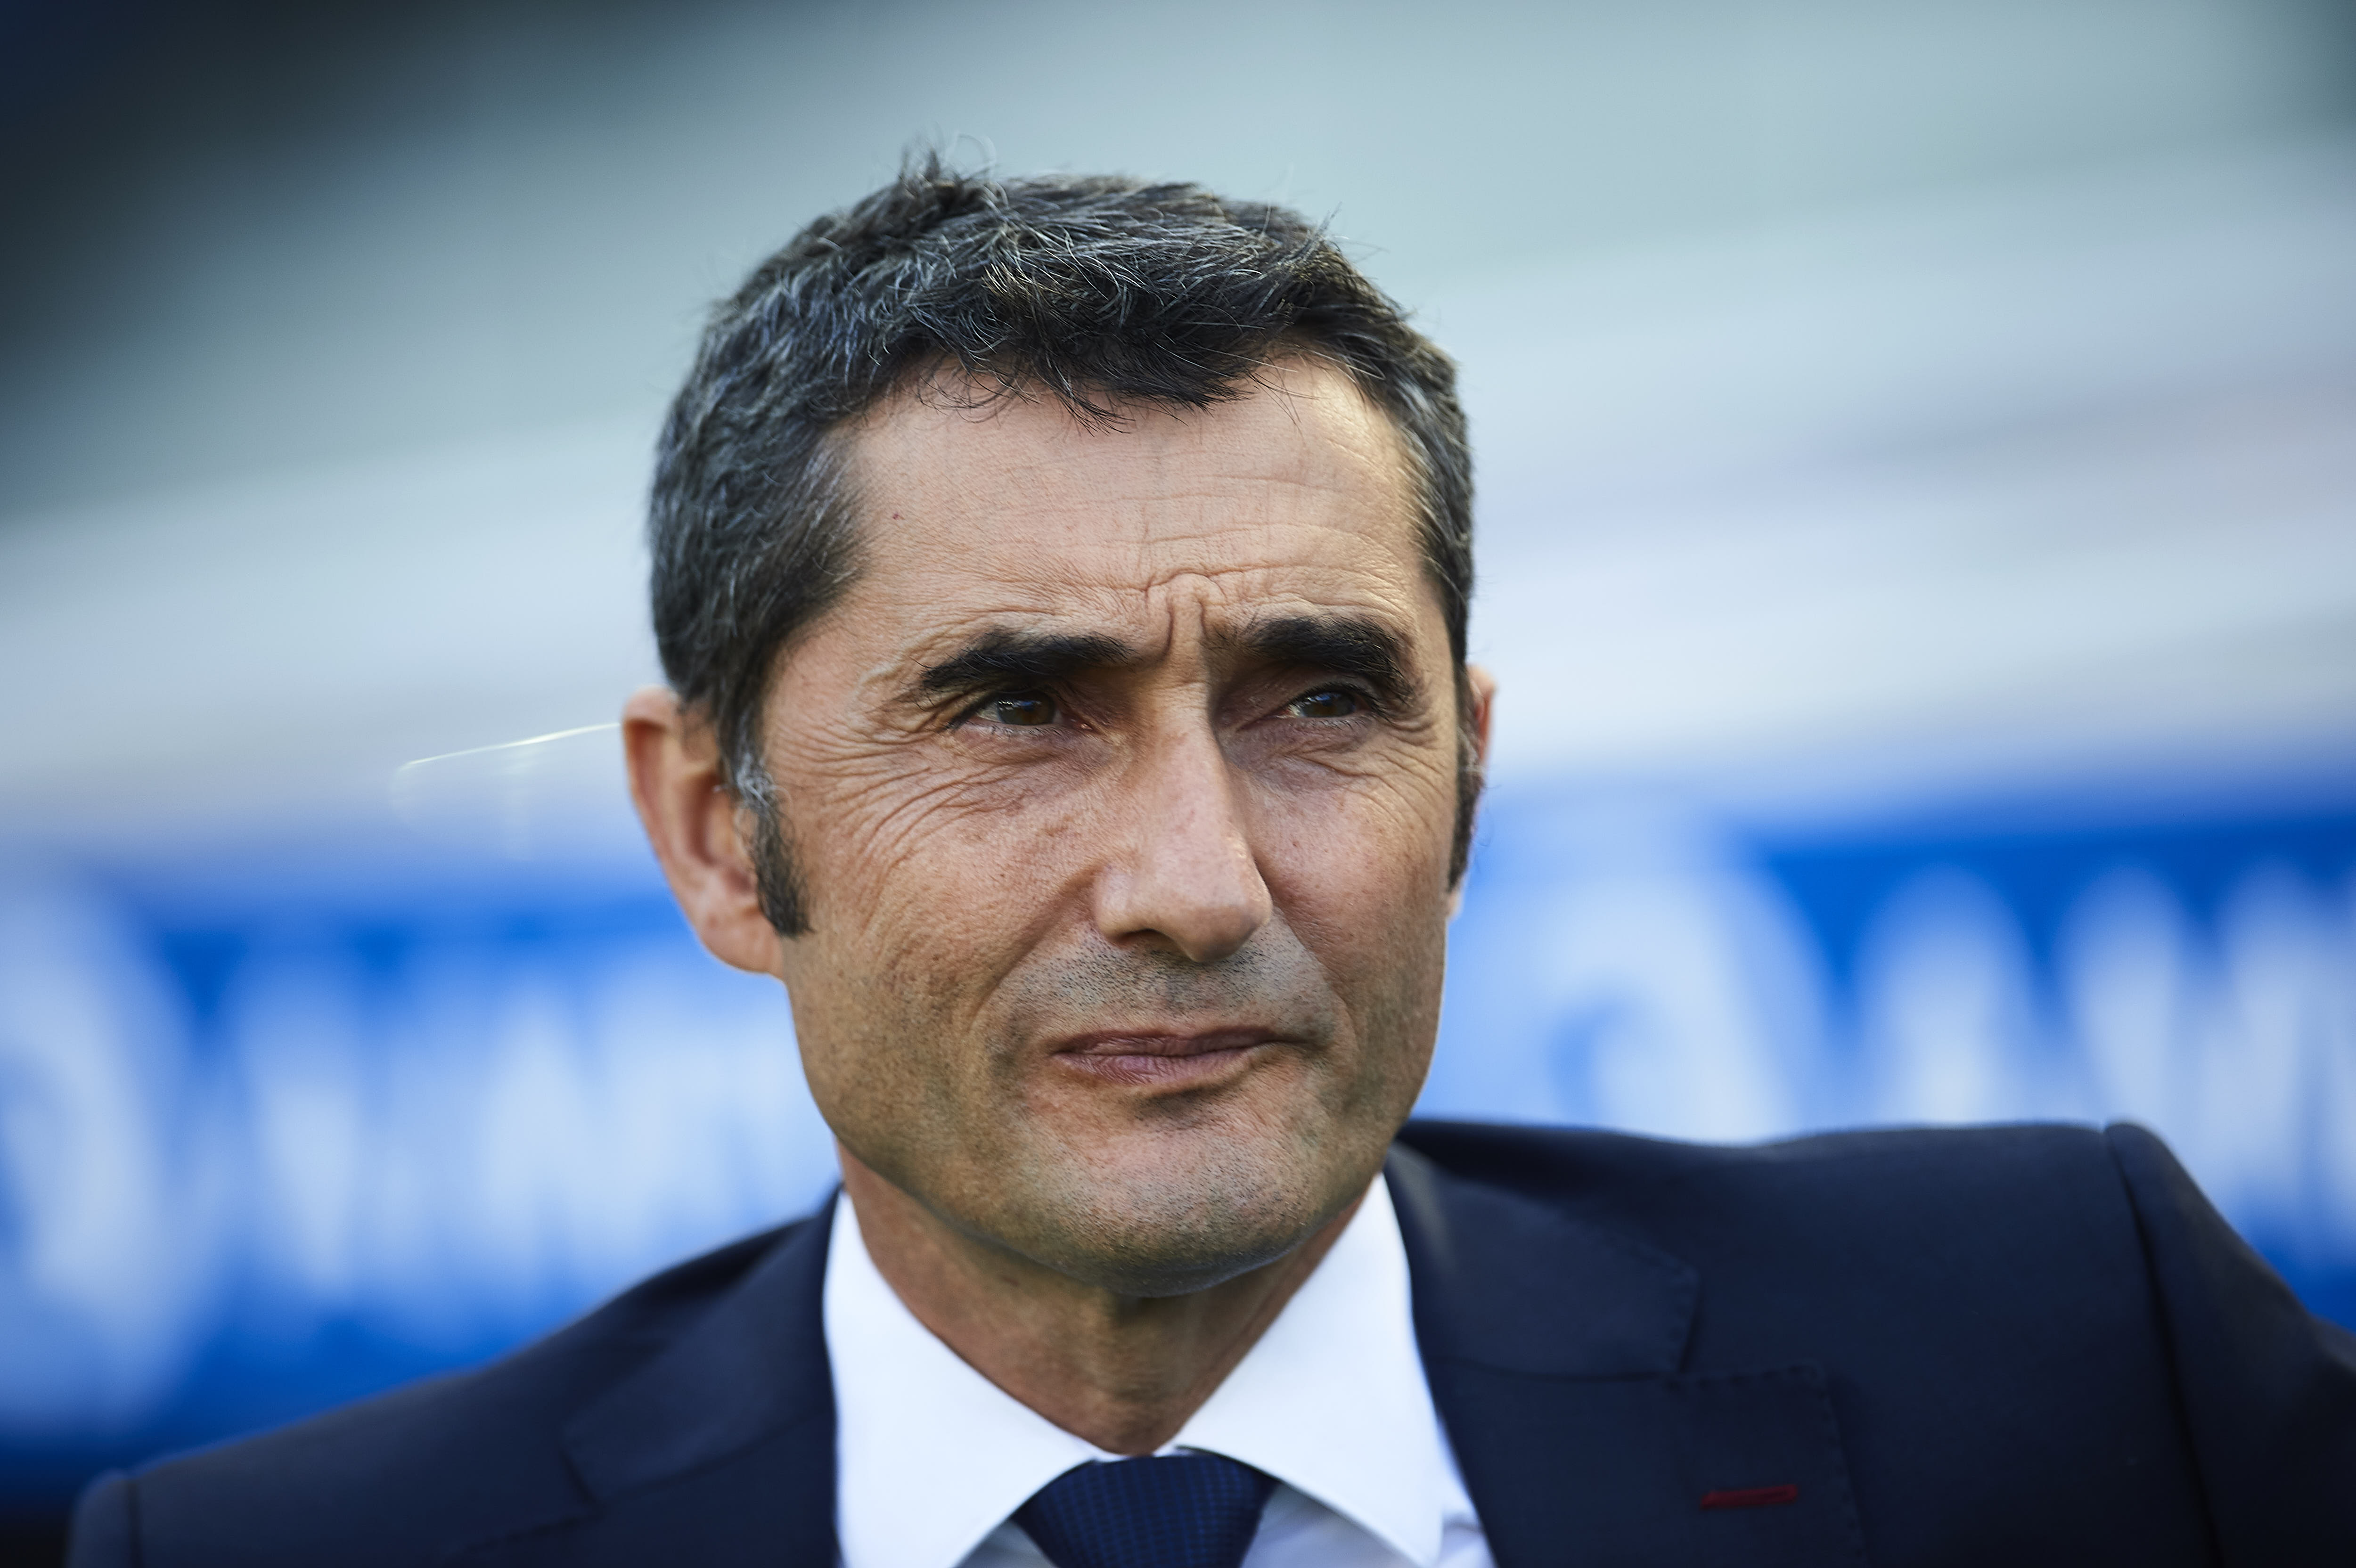 SAN SEBASTIAN, SPAIN - SEPTEMBER 15:  Head Coach of FC Barcelona Ernesto Valverde looks on during the La Liga match between Real Sociedad and FC Barcelona at Estadio Anoeta on September 15, 2018 in San Sebastian, Spain.  (Photo by Aitor Alcalde/Getty Images)